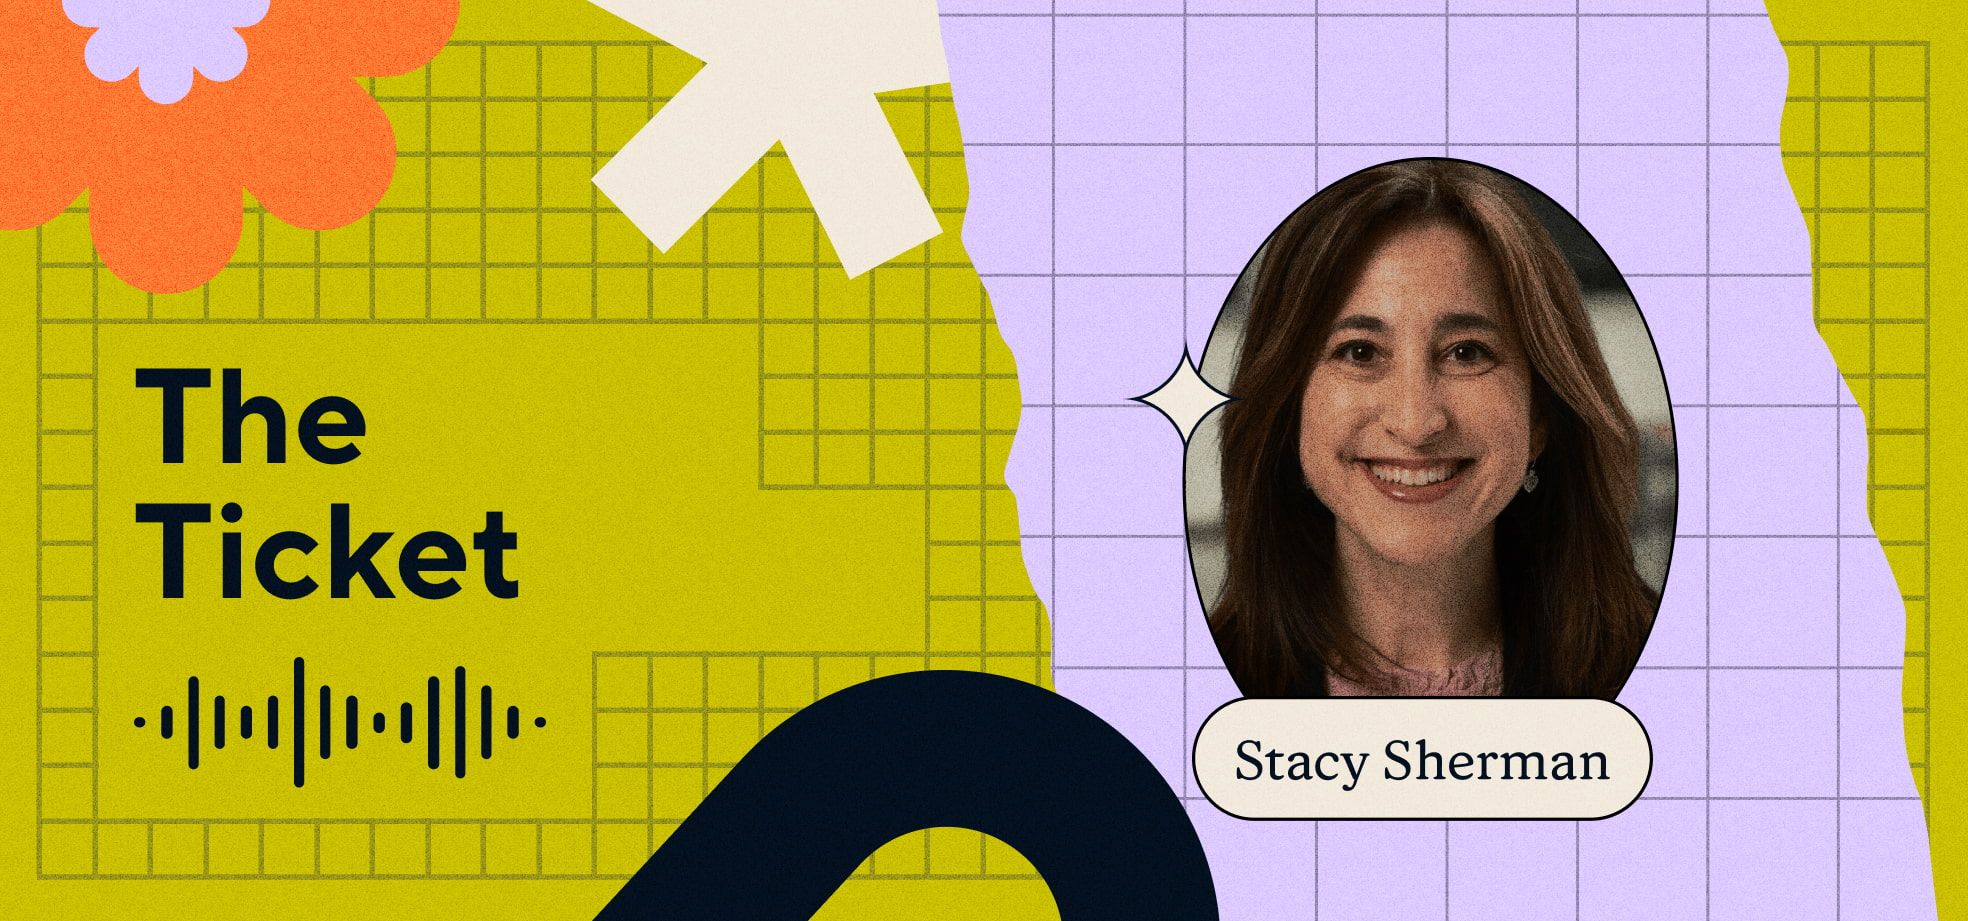 The Ticket: Stacy Sherman on how to design customer experiences that drive loyalty [Video]